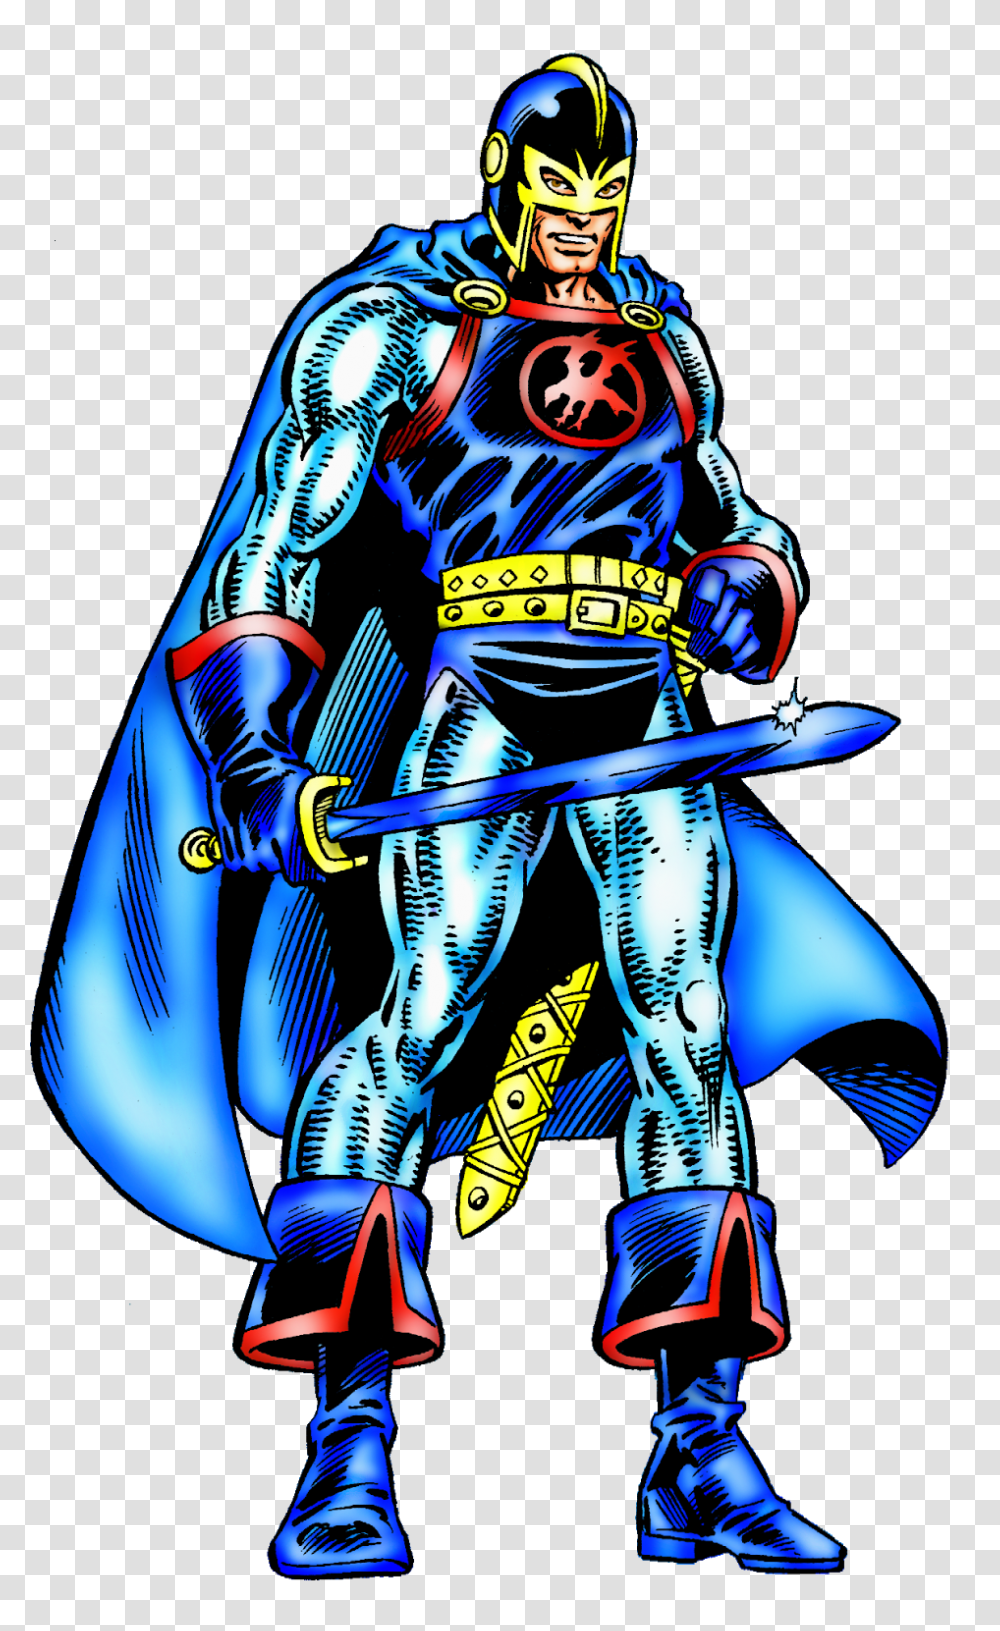 Black Knight Iii Avengers Heroes For Hire Black Knight Avengers, Person, Human, Astronaut, Helmet Transparent Png